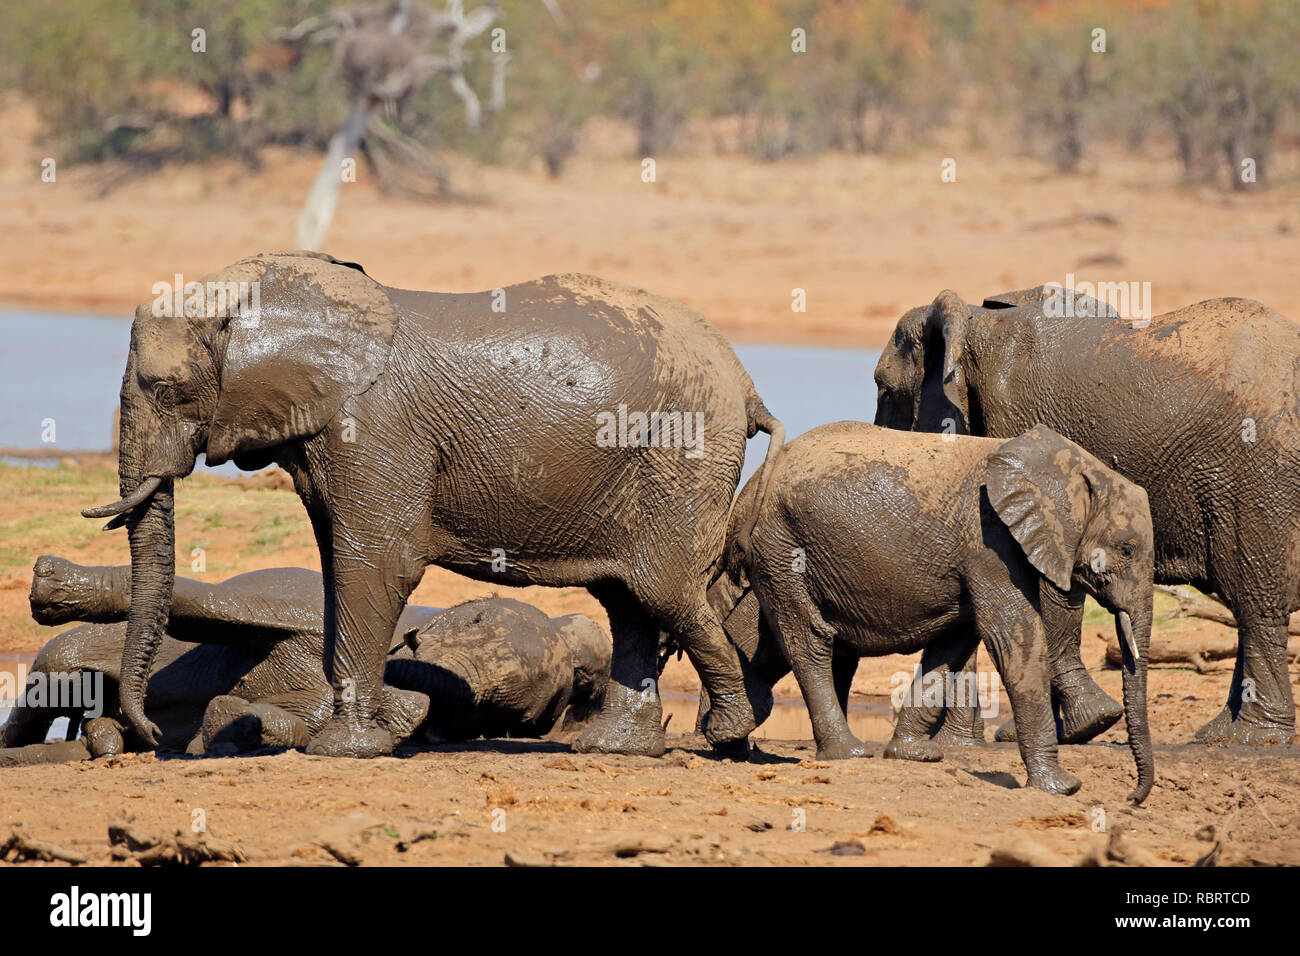 African elephants (Loxodonta africana) at a waterhole, Kruger National Park, South Africa Stock Photo